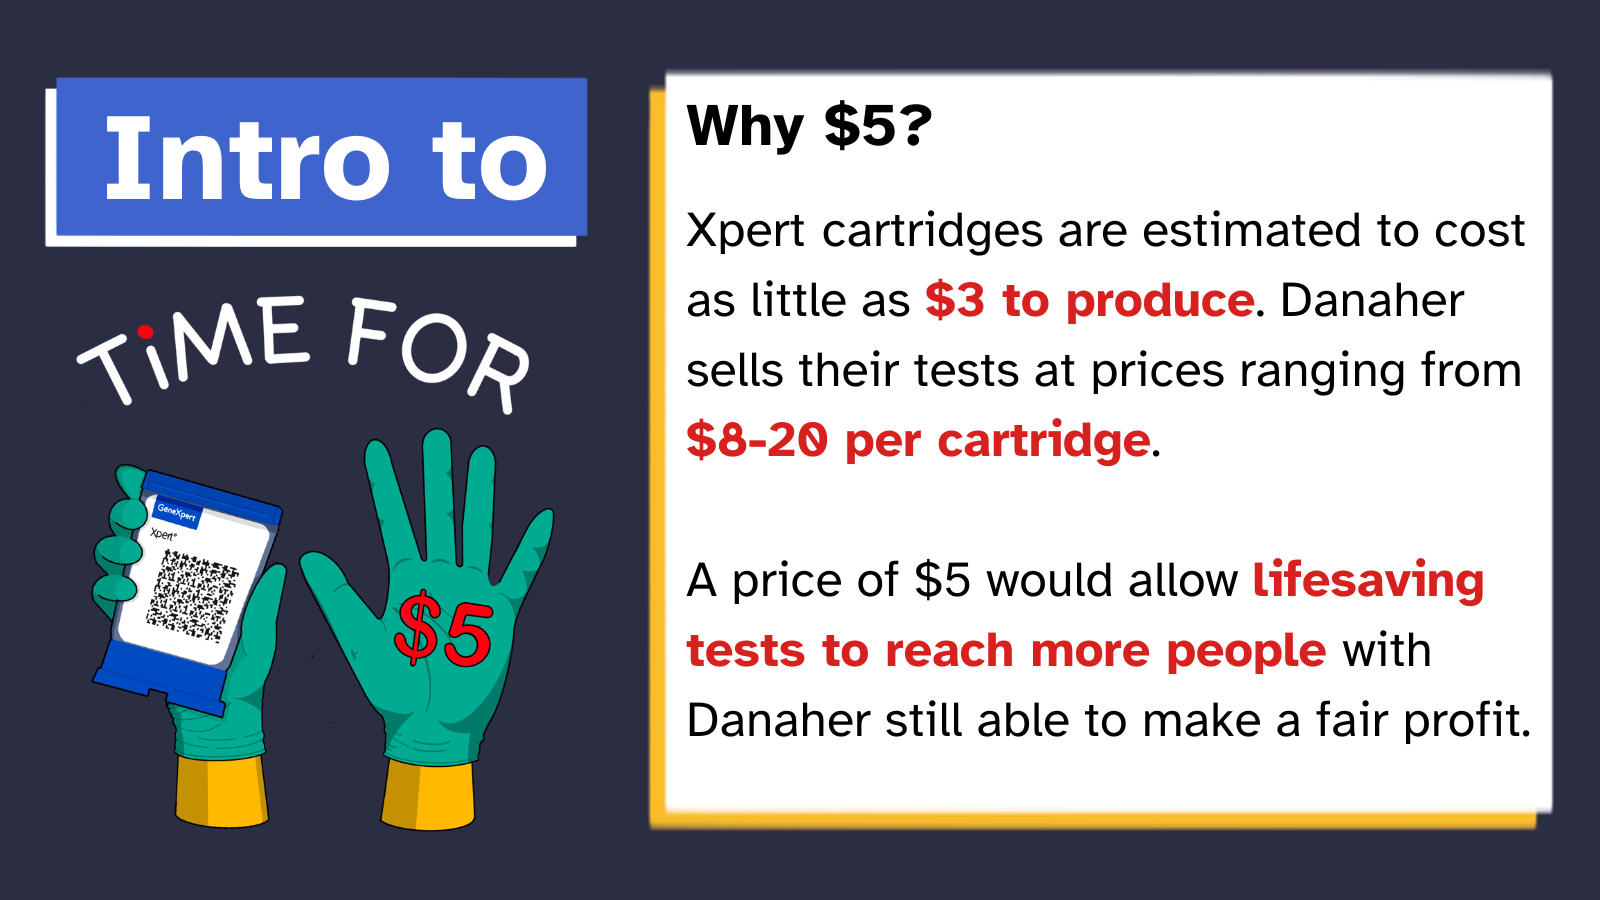 Intro to Time for $5. Why $5? Xpert cartridges are estimated to cost as little as $3 to produce. Danaher sells their tests at prices ranging from $8-20 per cartridge. A price of $5 would allow lifesaving tests to reach more people with Danaher still able to make a fair profit.